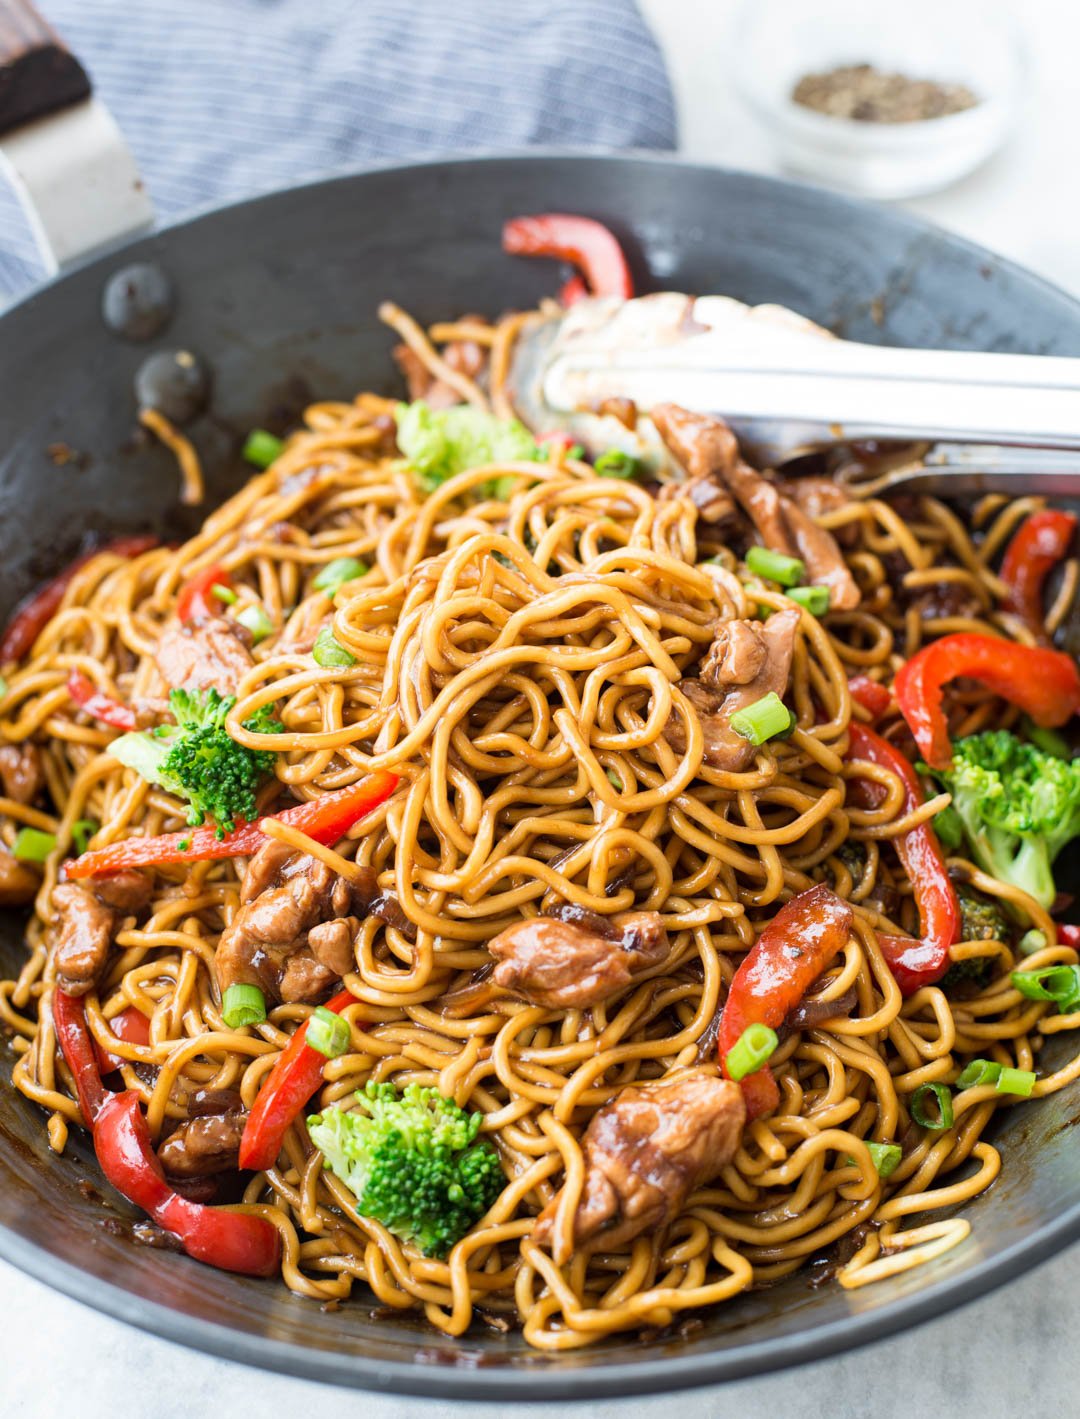 This Easy Ramen Noodle recipe with chicken and flavorful stir-fry sauce takes only 20 minutes to make and is a perfect mid-week dinner.